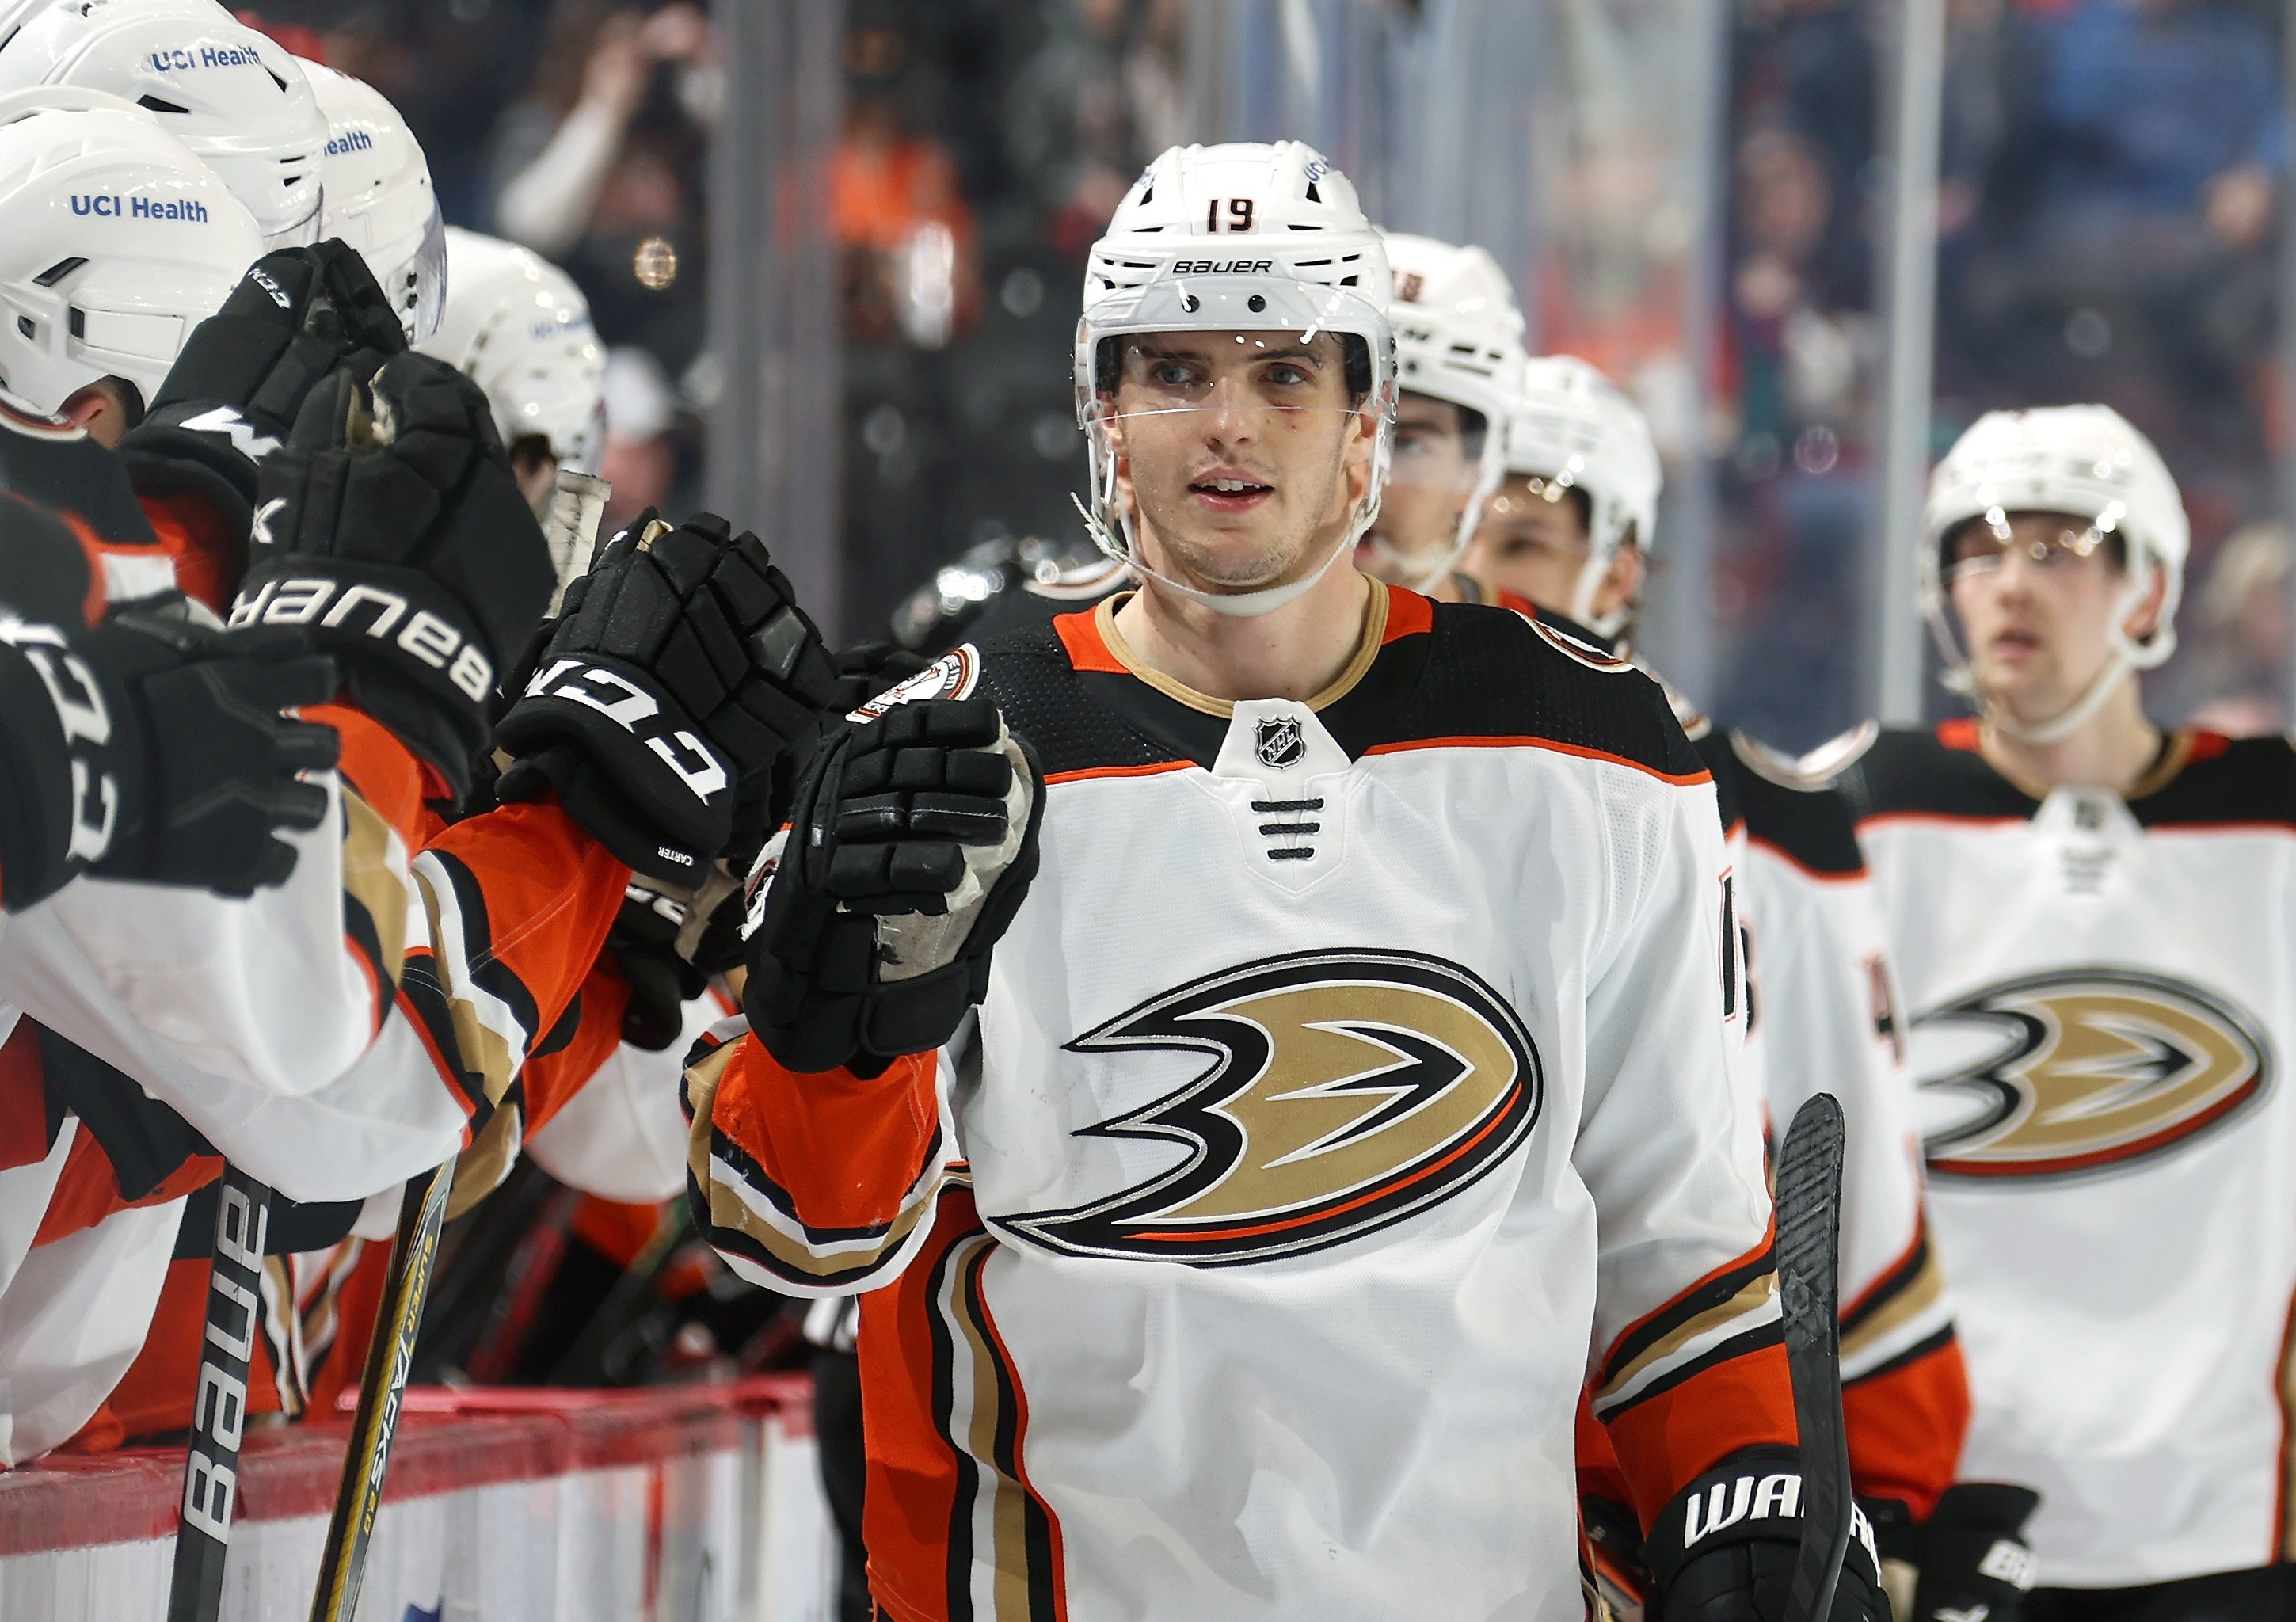 Ducks' Terry is Evolving Into an Elite NHL Sniper